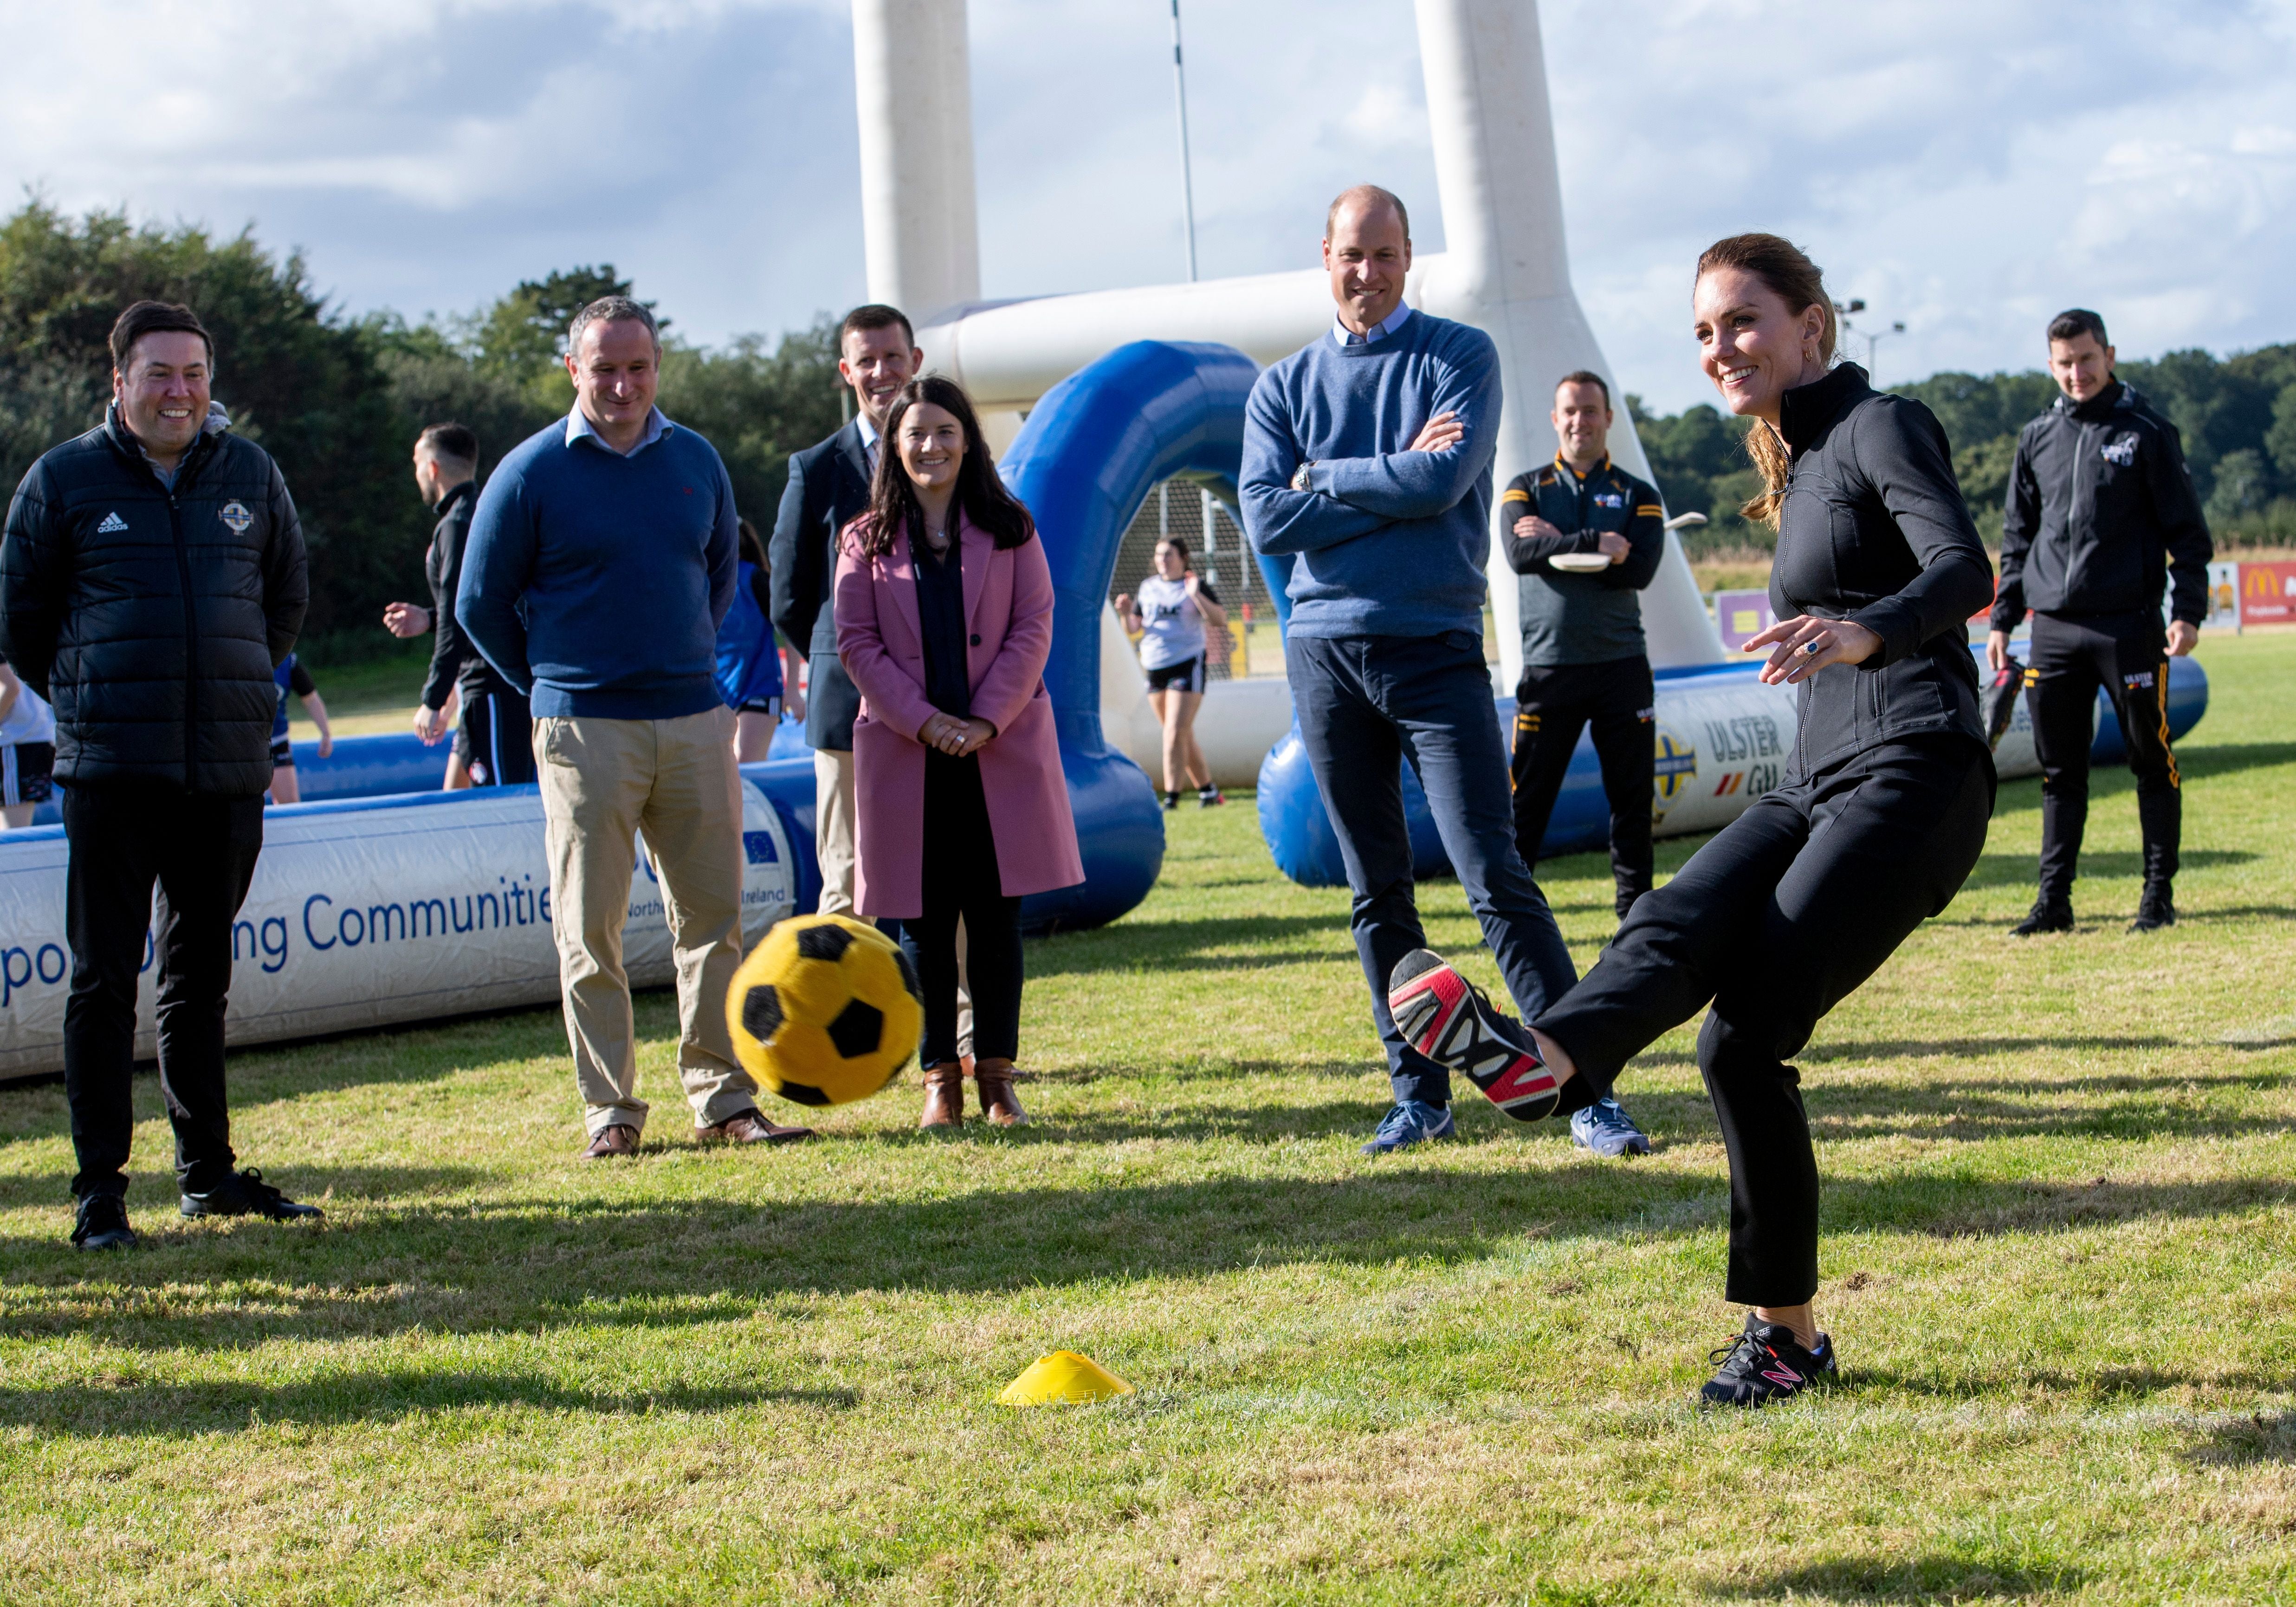 In September, the Duke and Duchess of Cambridge visited the City of Derry rugby club where they participated in a sports initiative bringing football, rugby and GAA playing children, together (Tim Rooke/PA)